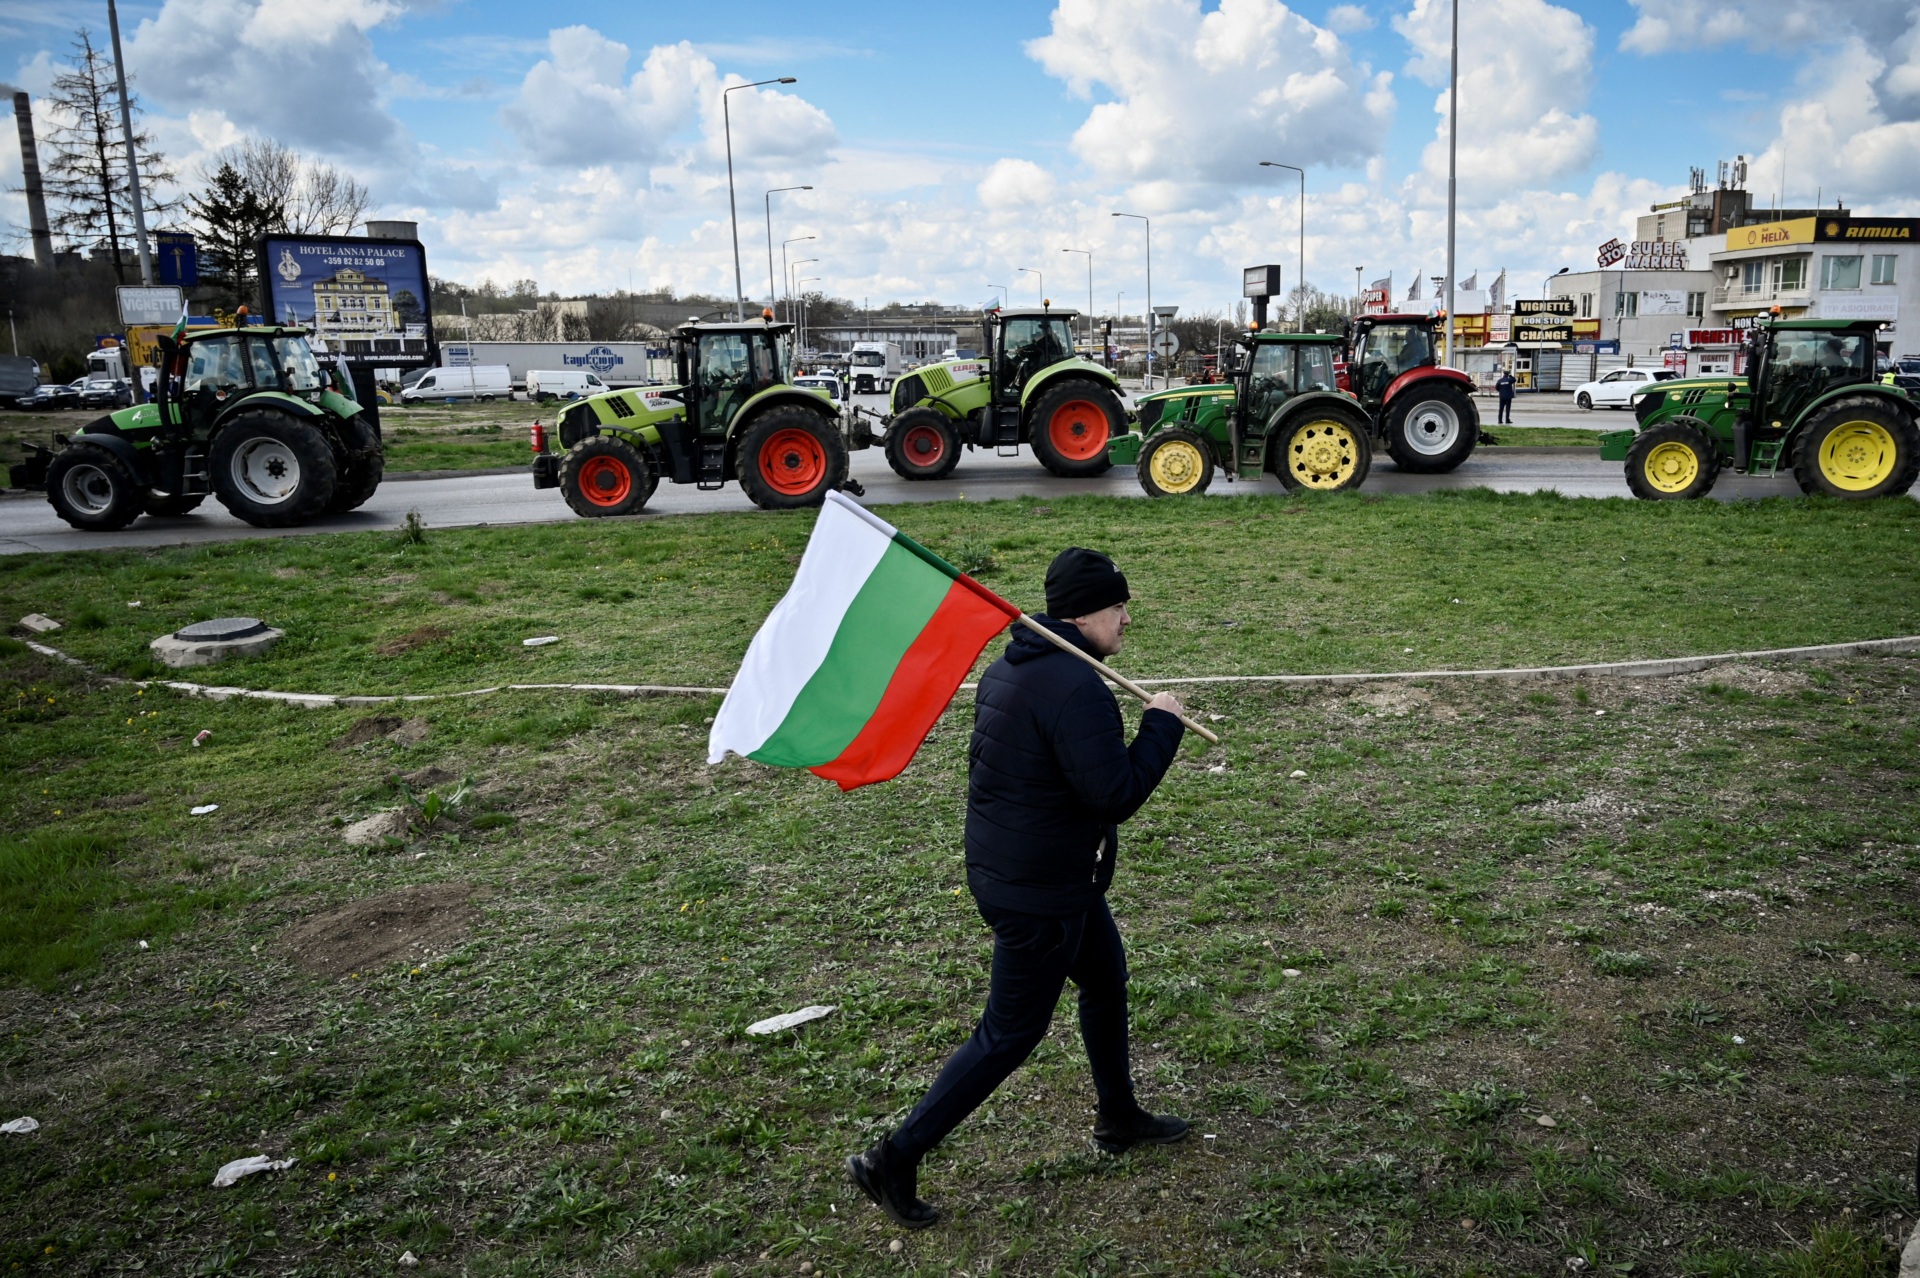 A farmer waves the Bulgarian flag during an action to block trucks crossing the Danube bridge, marking the border between Bulgaria and Romania in a protest against the duty-free import of grain coming from Ukraine into the EU, in Rousse on March 29, 2023. (Photo by Nikolay DOYCHINOV / AFP) (Photo by NIKOLAY DOYCHINOV/AFP via Getty Images)